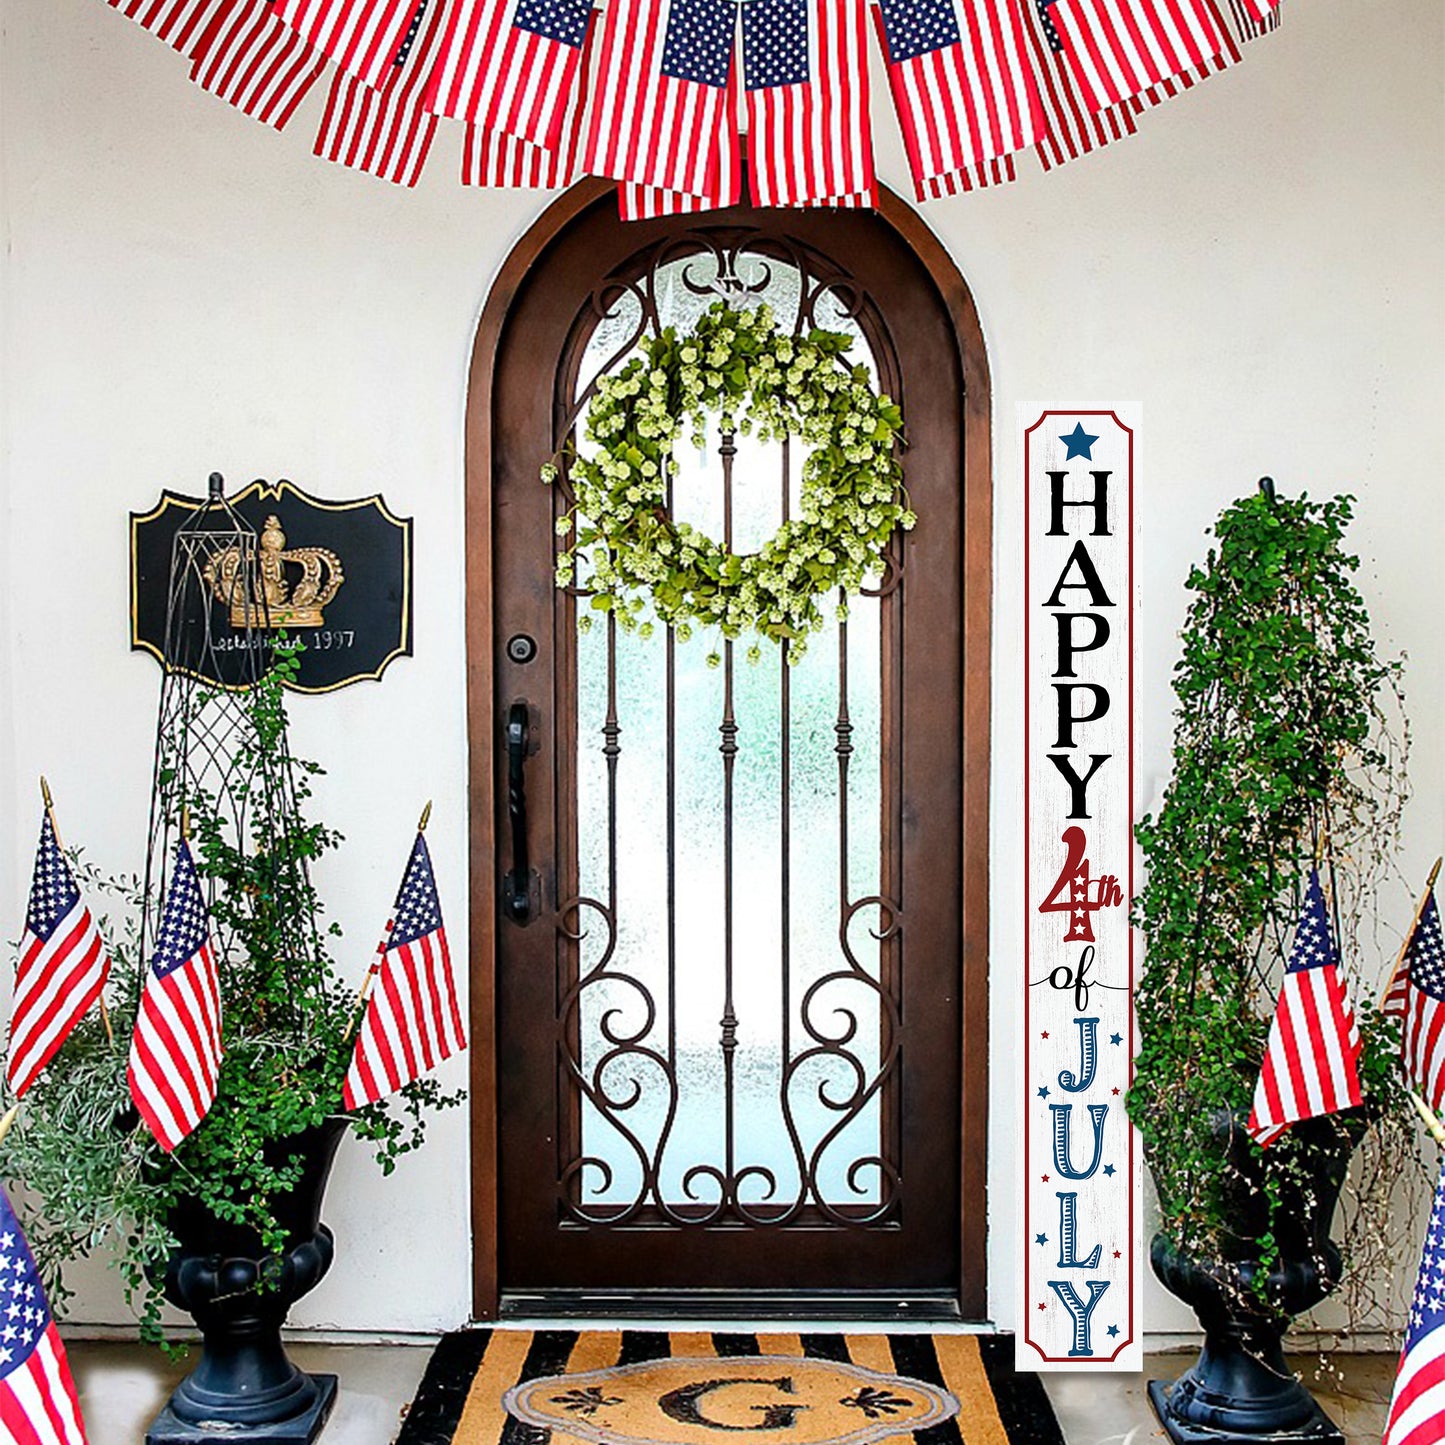 72in Happy 4th of July Sign | Patriotic Wooden Porch Decor | Farmhouse Decor for Porch | Independence Day Outdoor Decor